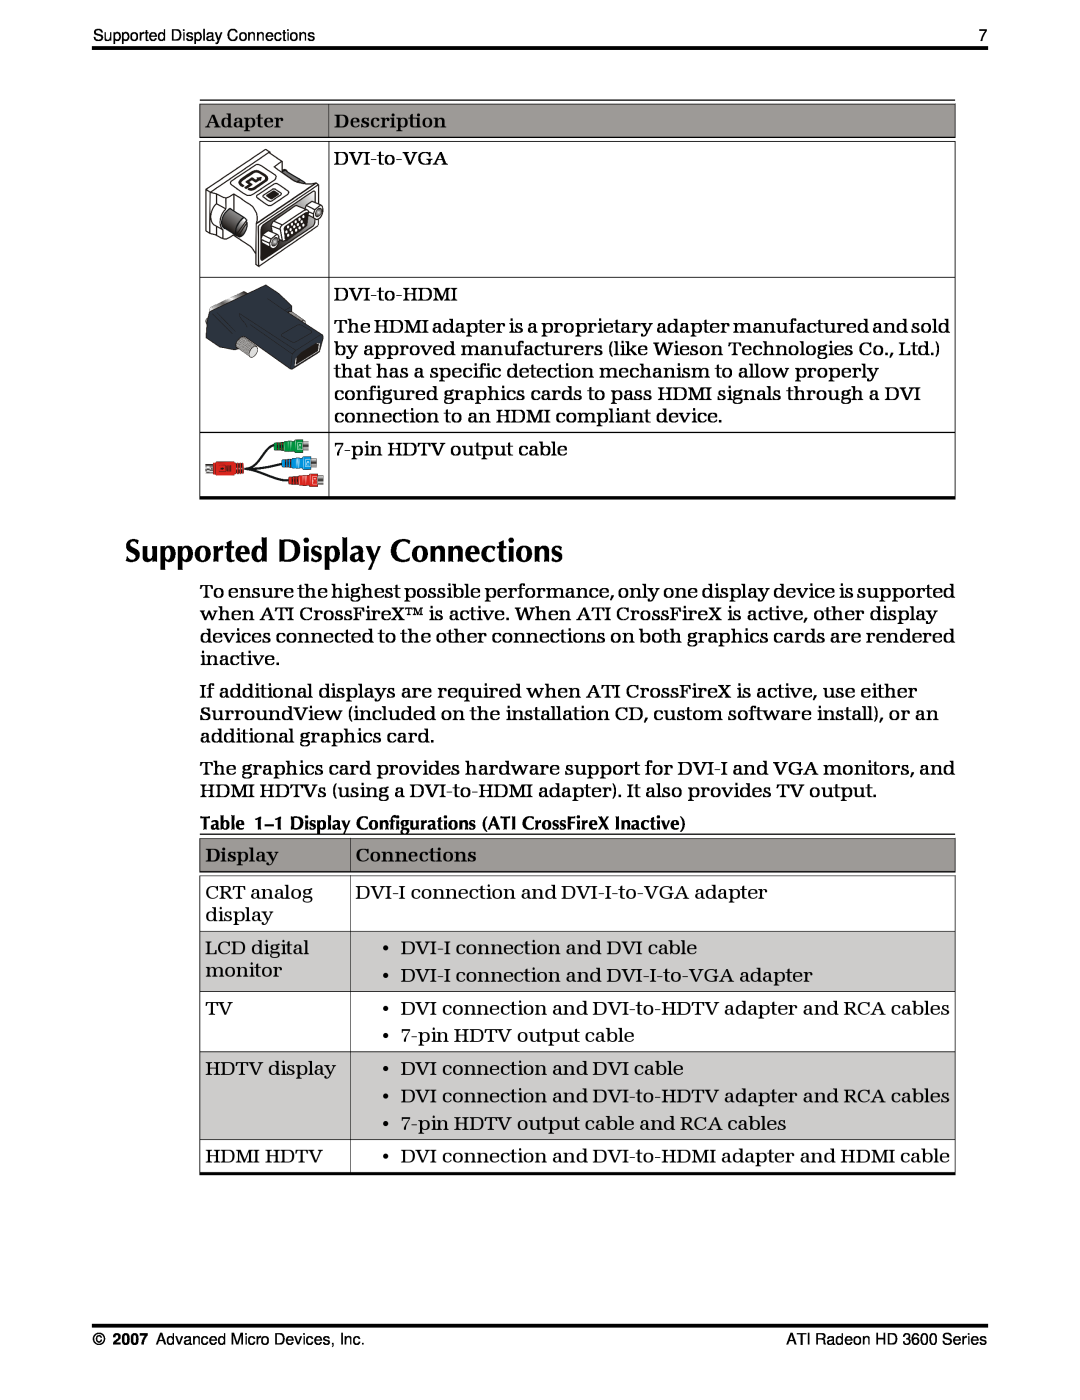 AMD 3600 manual Supported Display Connections, Adapter, Description, 1 Display Configurations ATI CrossFireX Inactive 